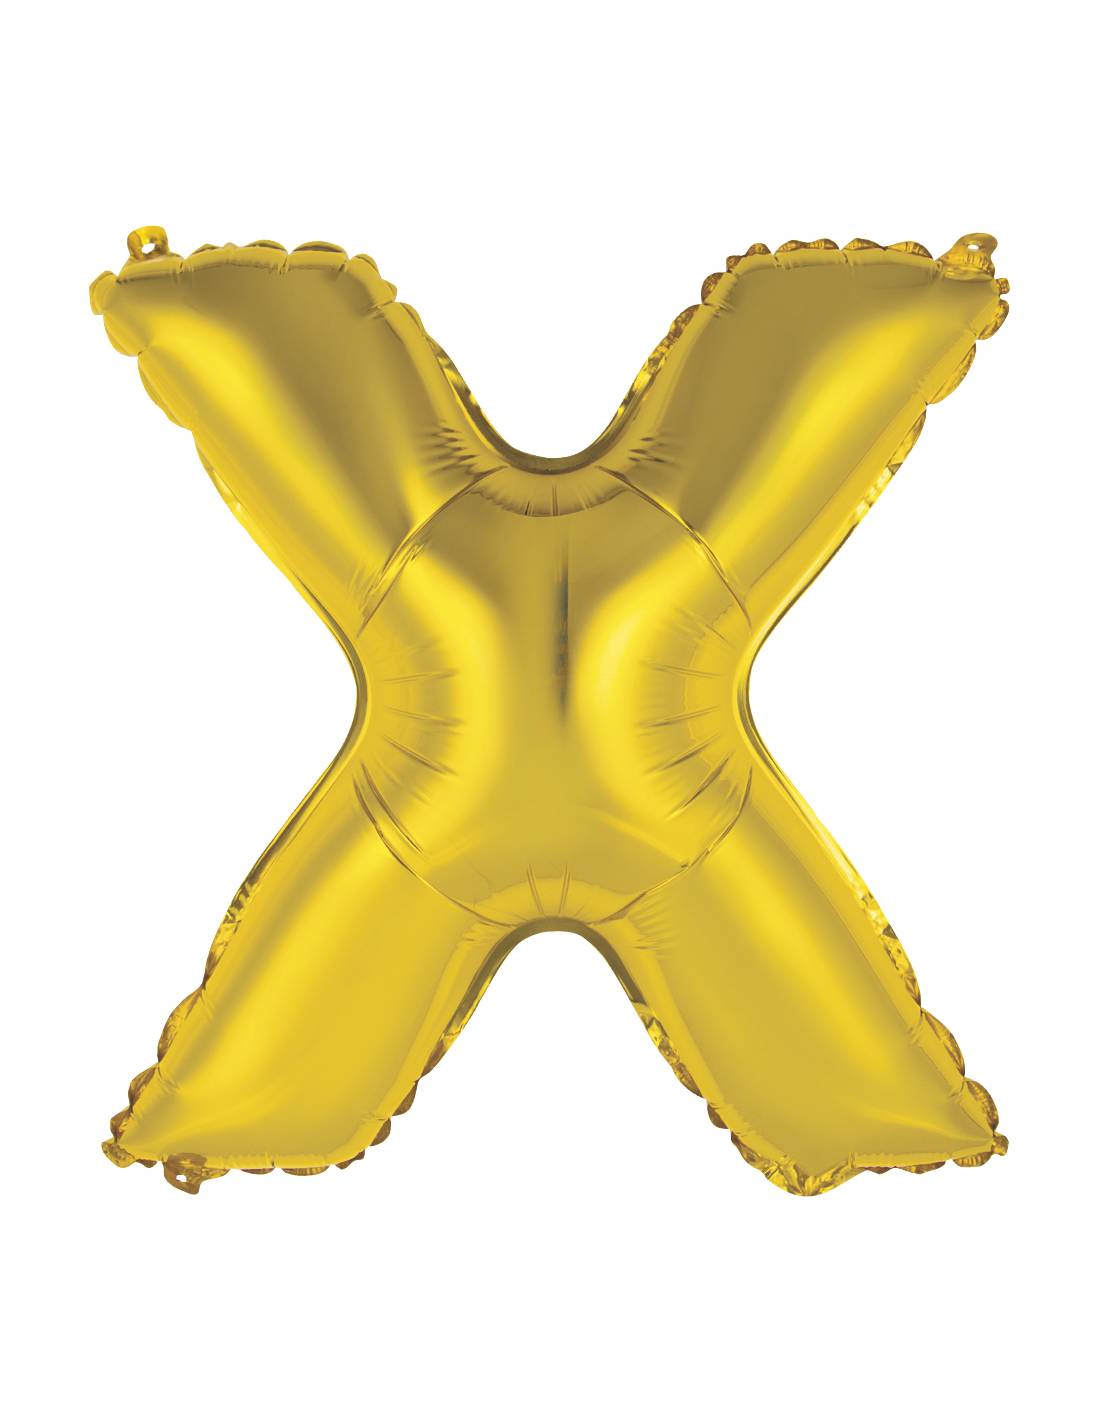 “X” Gold letter air filled balloon